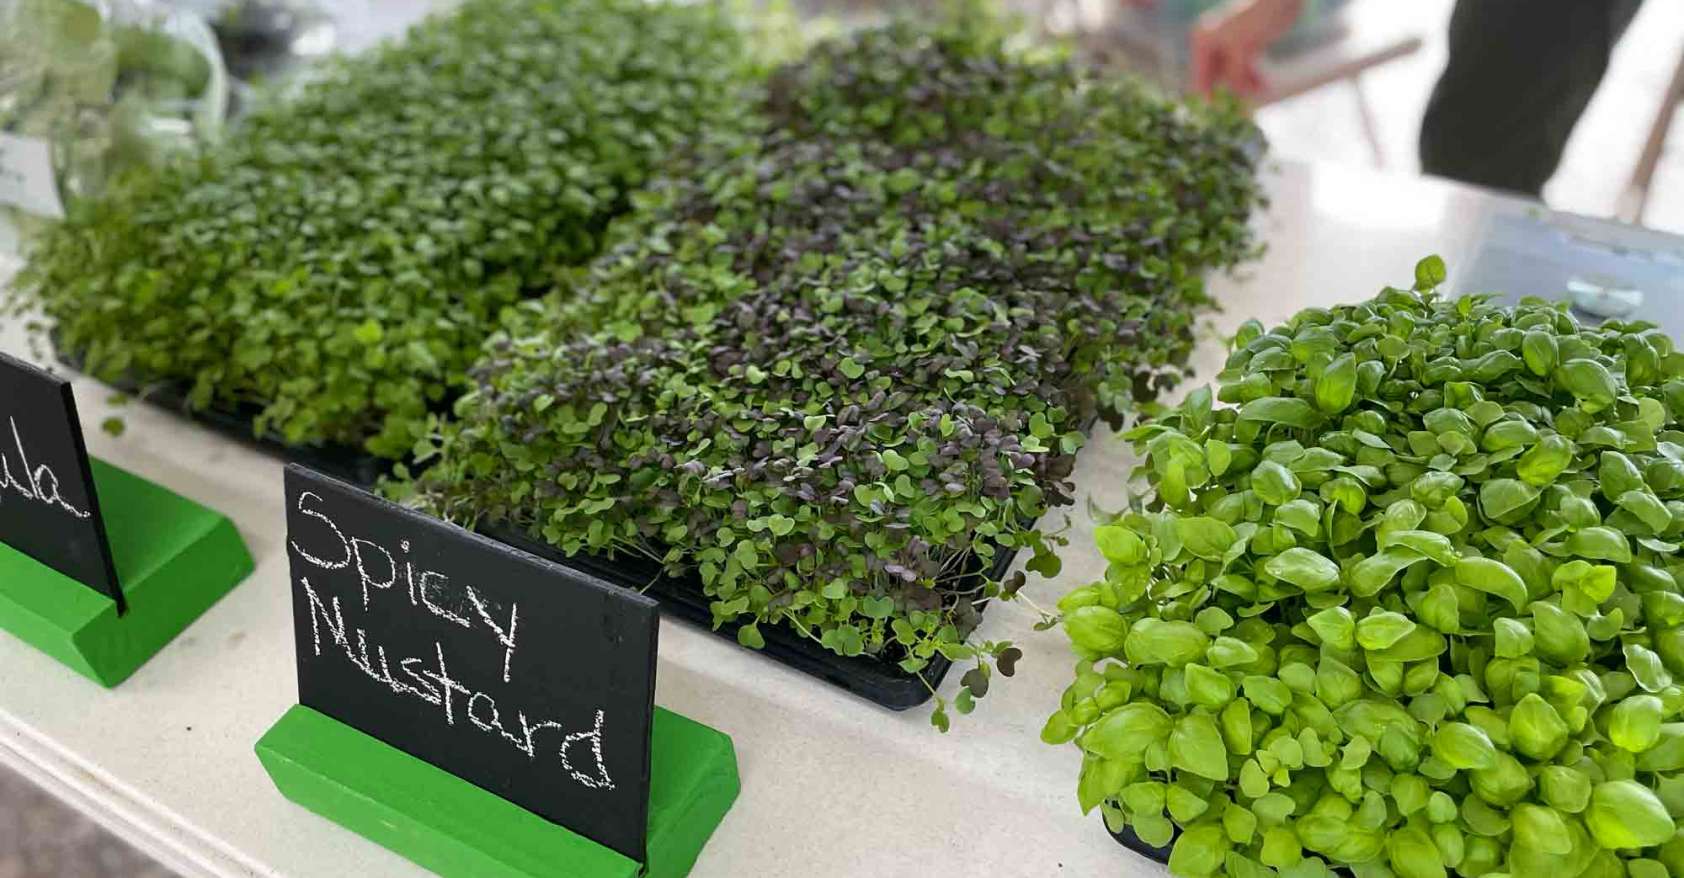 A table with trays of microgreens on it. The Spicy Mustard flavor is up front